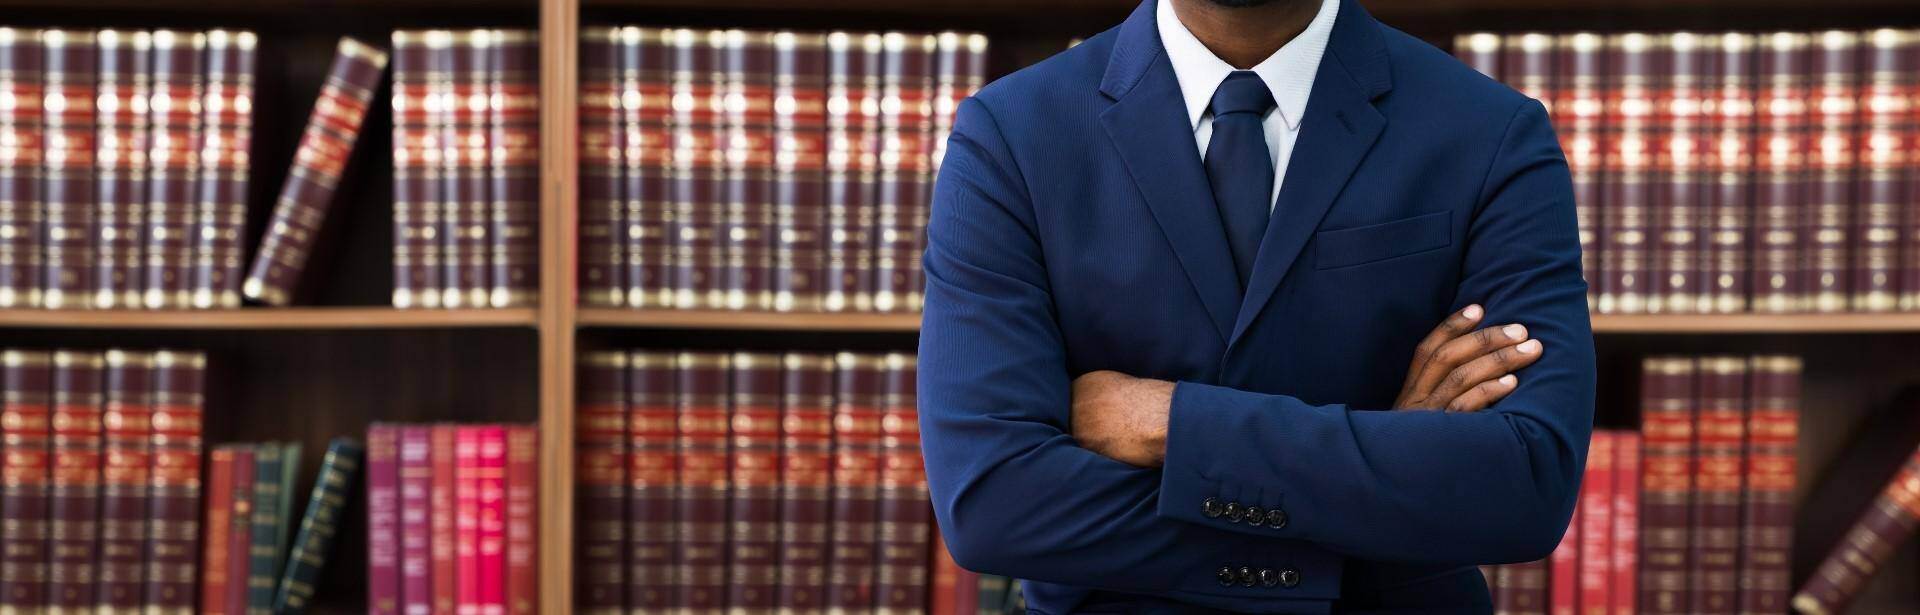 A black lawyer standing in front of a bookshelf of law book in Decatur, Georgia